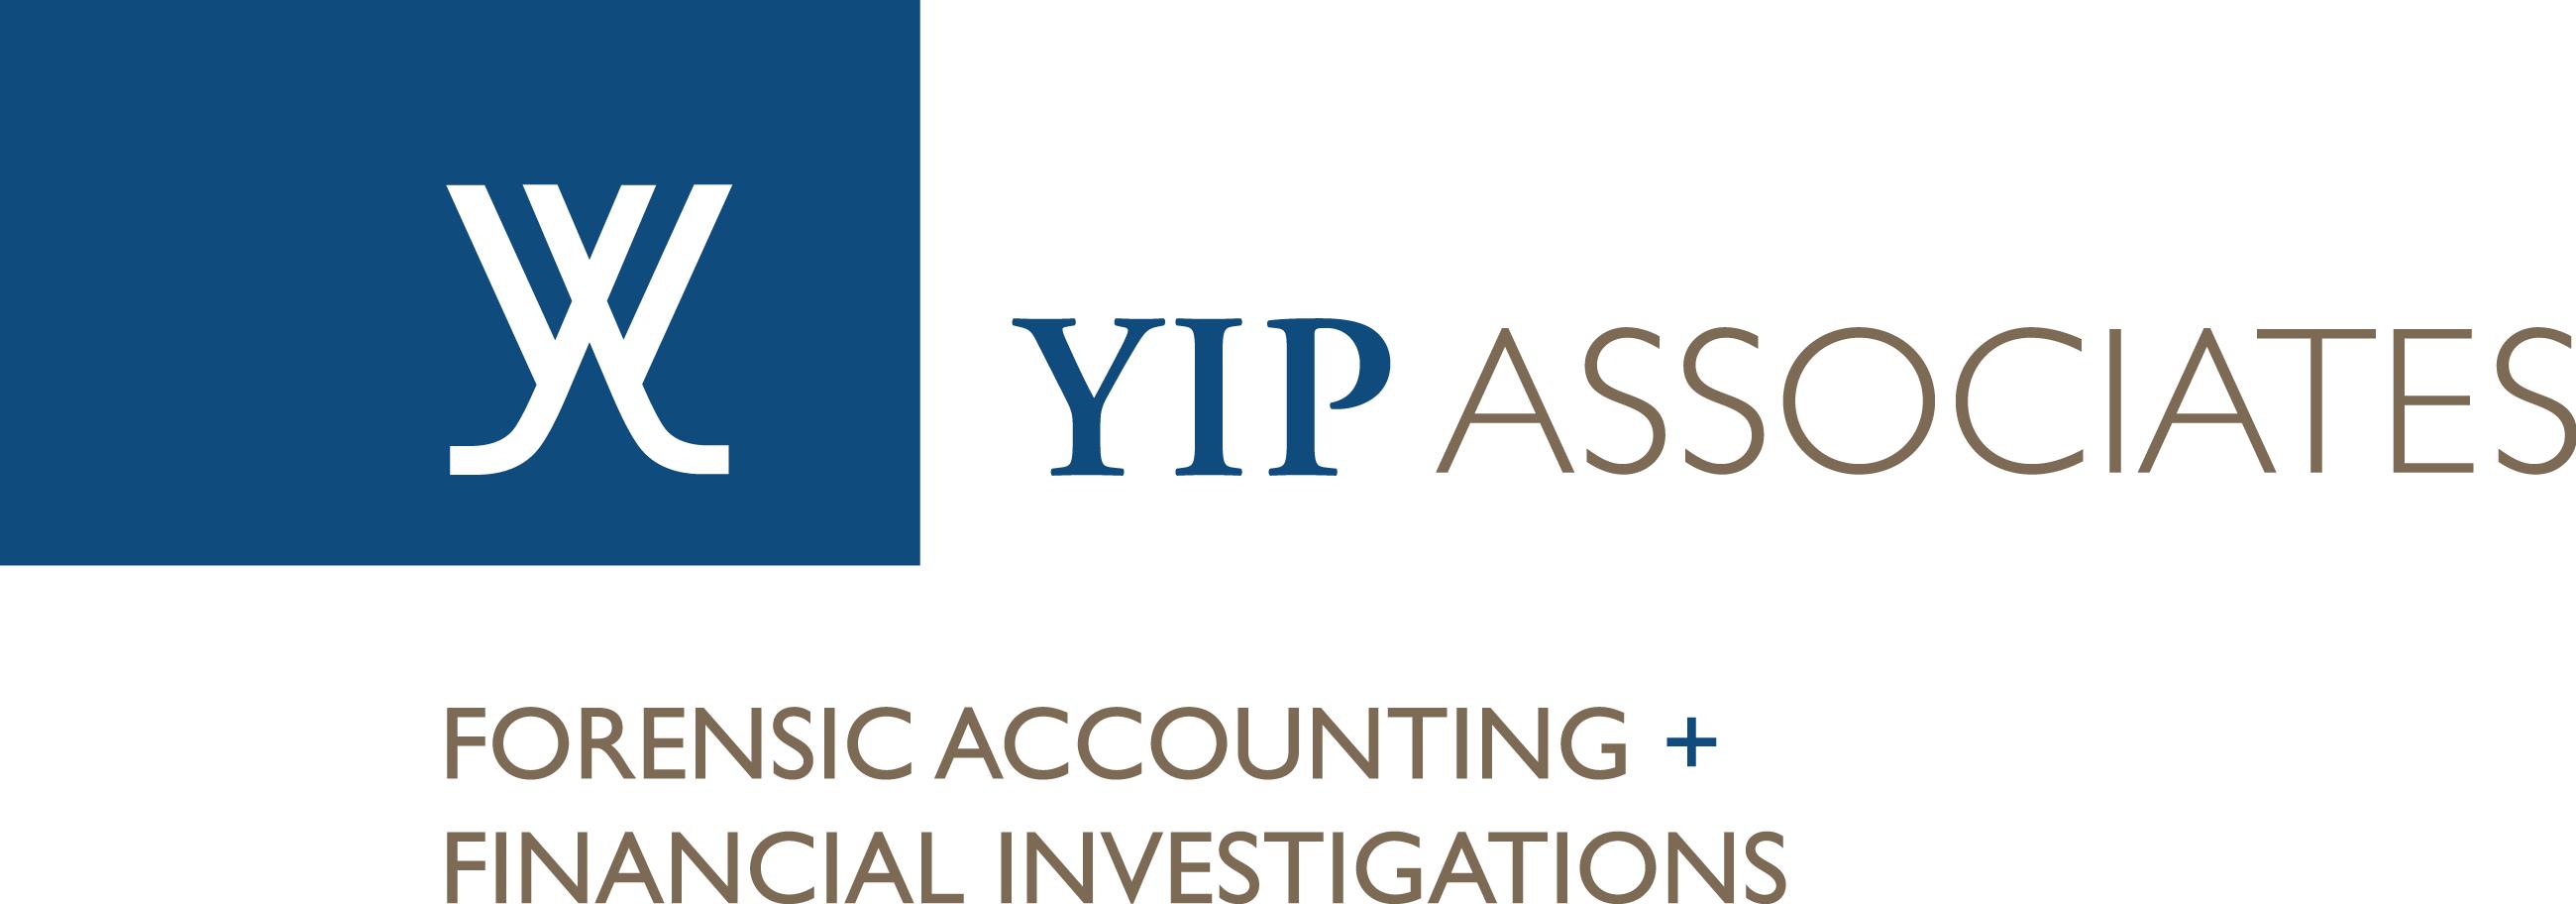 Live SOAEP Event – Meet Maria M. Yip and Associates – Practicing Experts in Forensic Accounting and Business Valuation – 10/22/16